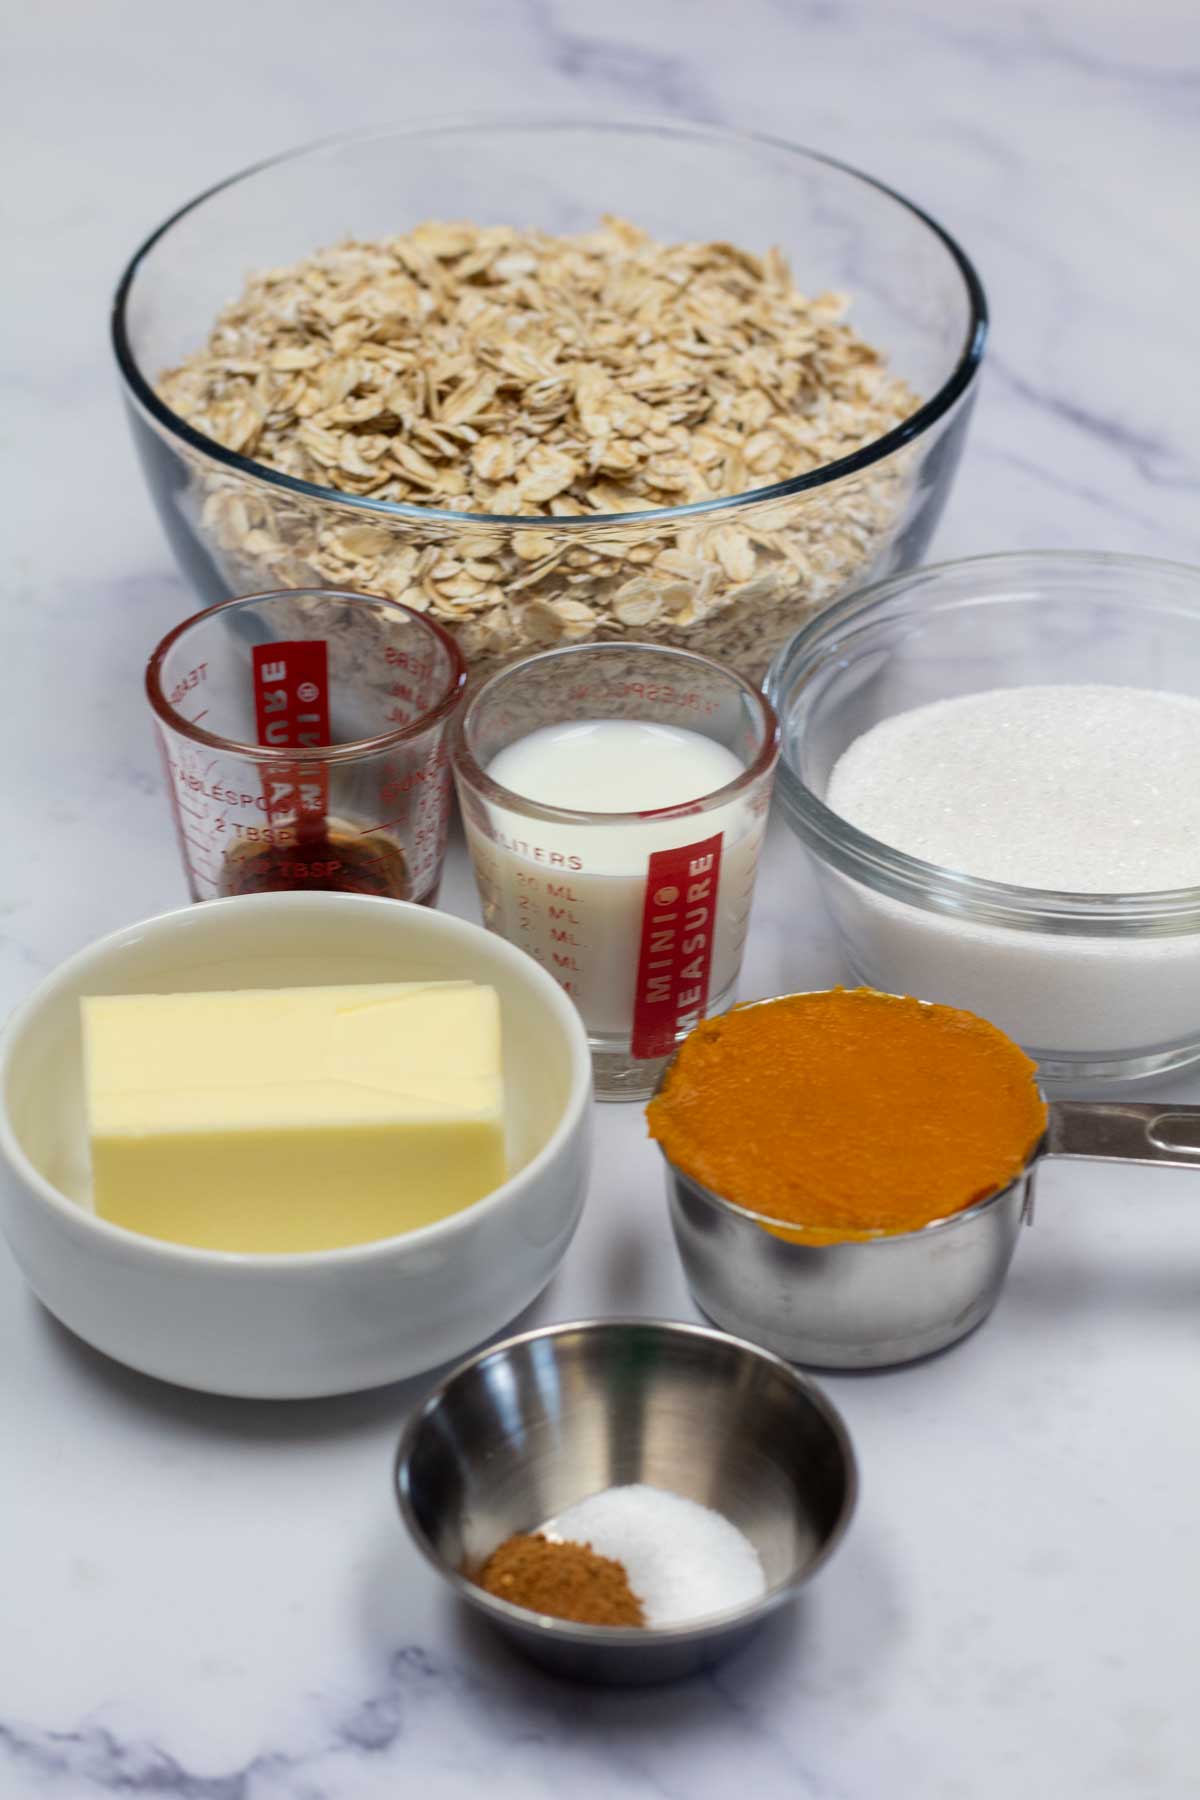 Tall image showing ingredients needed for no bake pumpkin cookies.